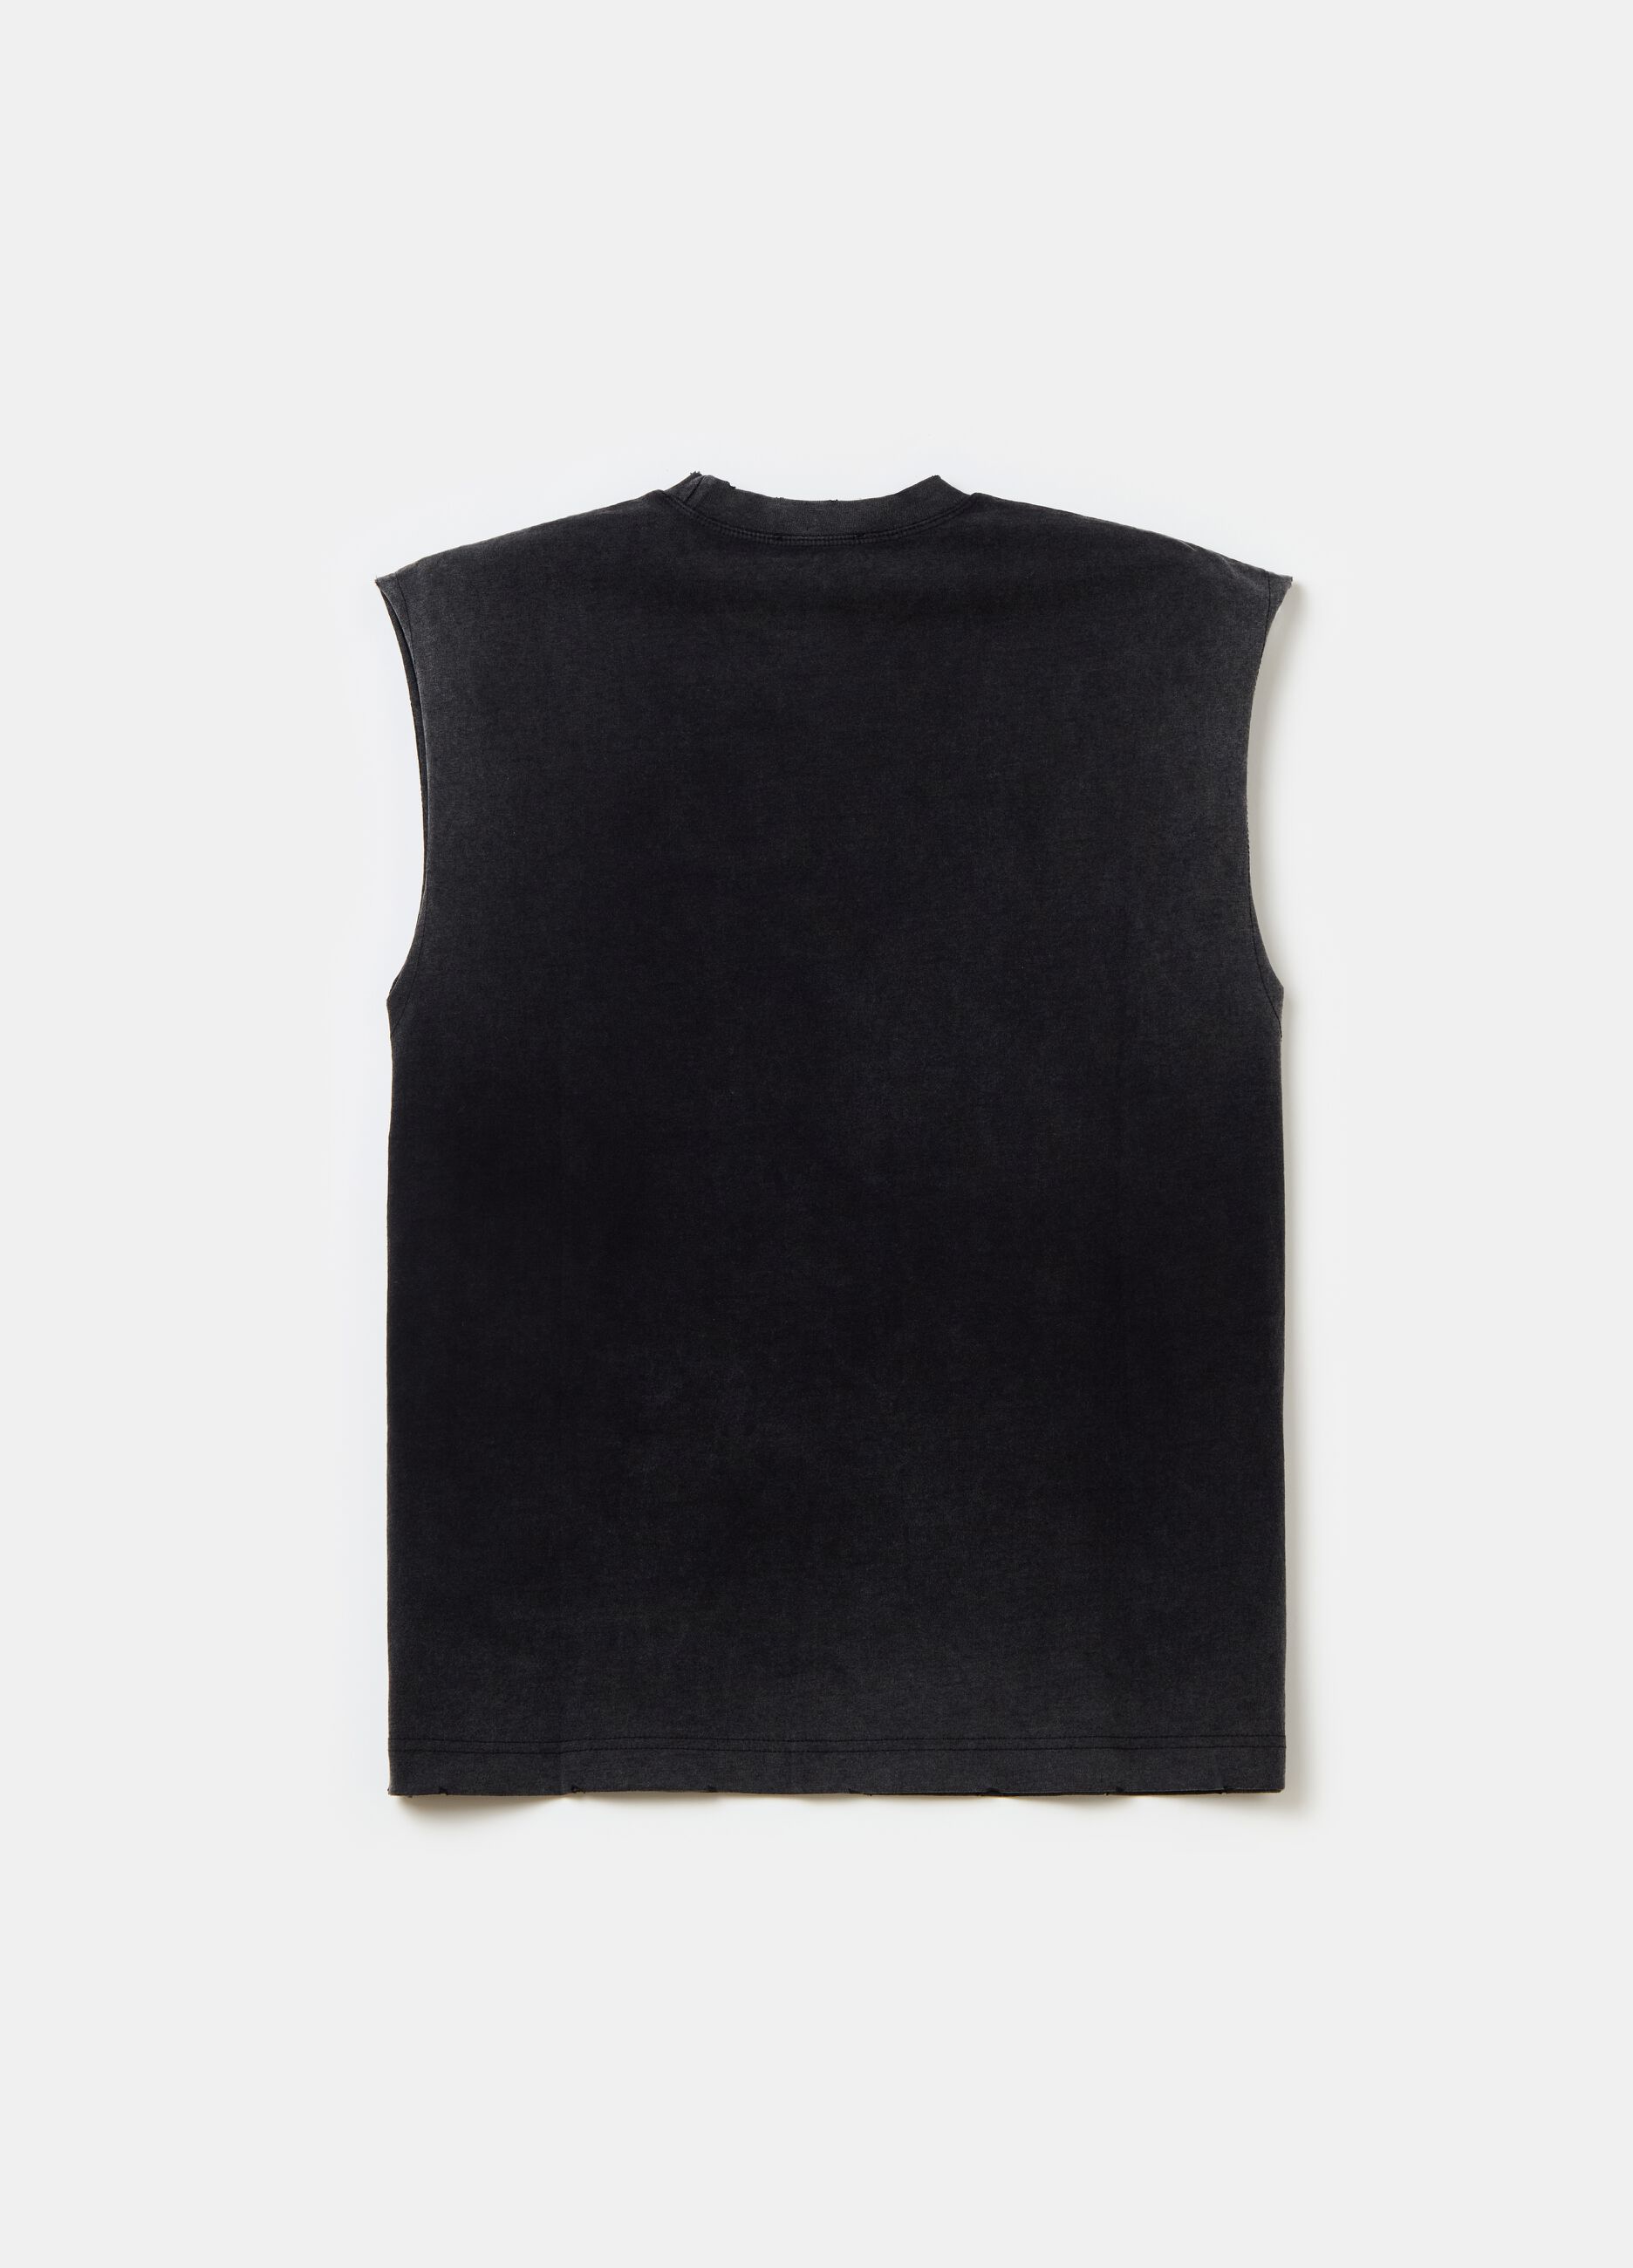 UTOPJA FOR THE SEA BEYOND tank top with abrasions and print